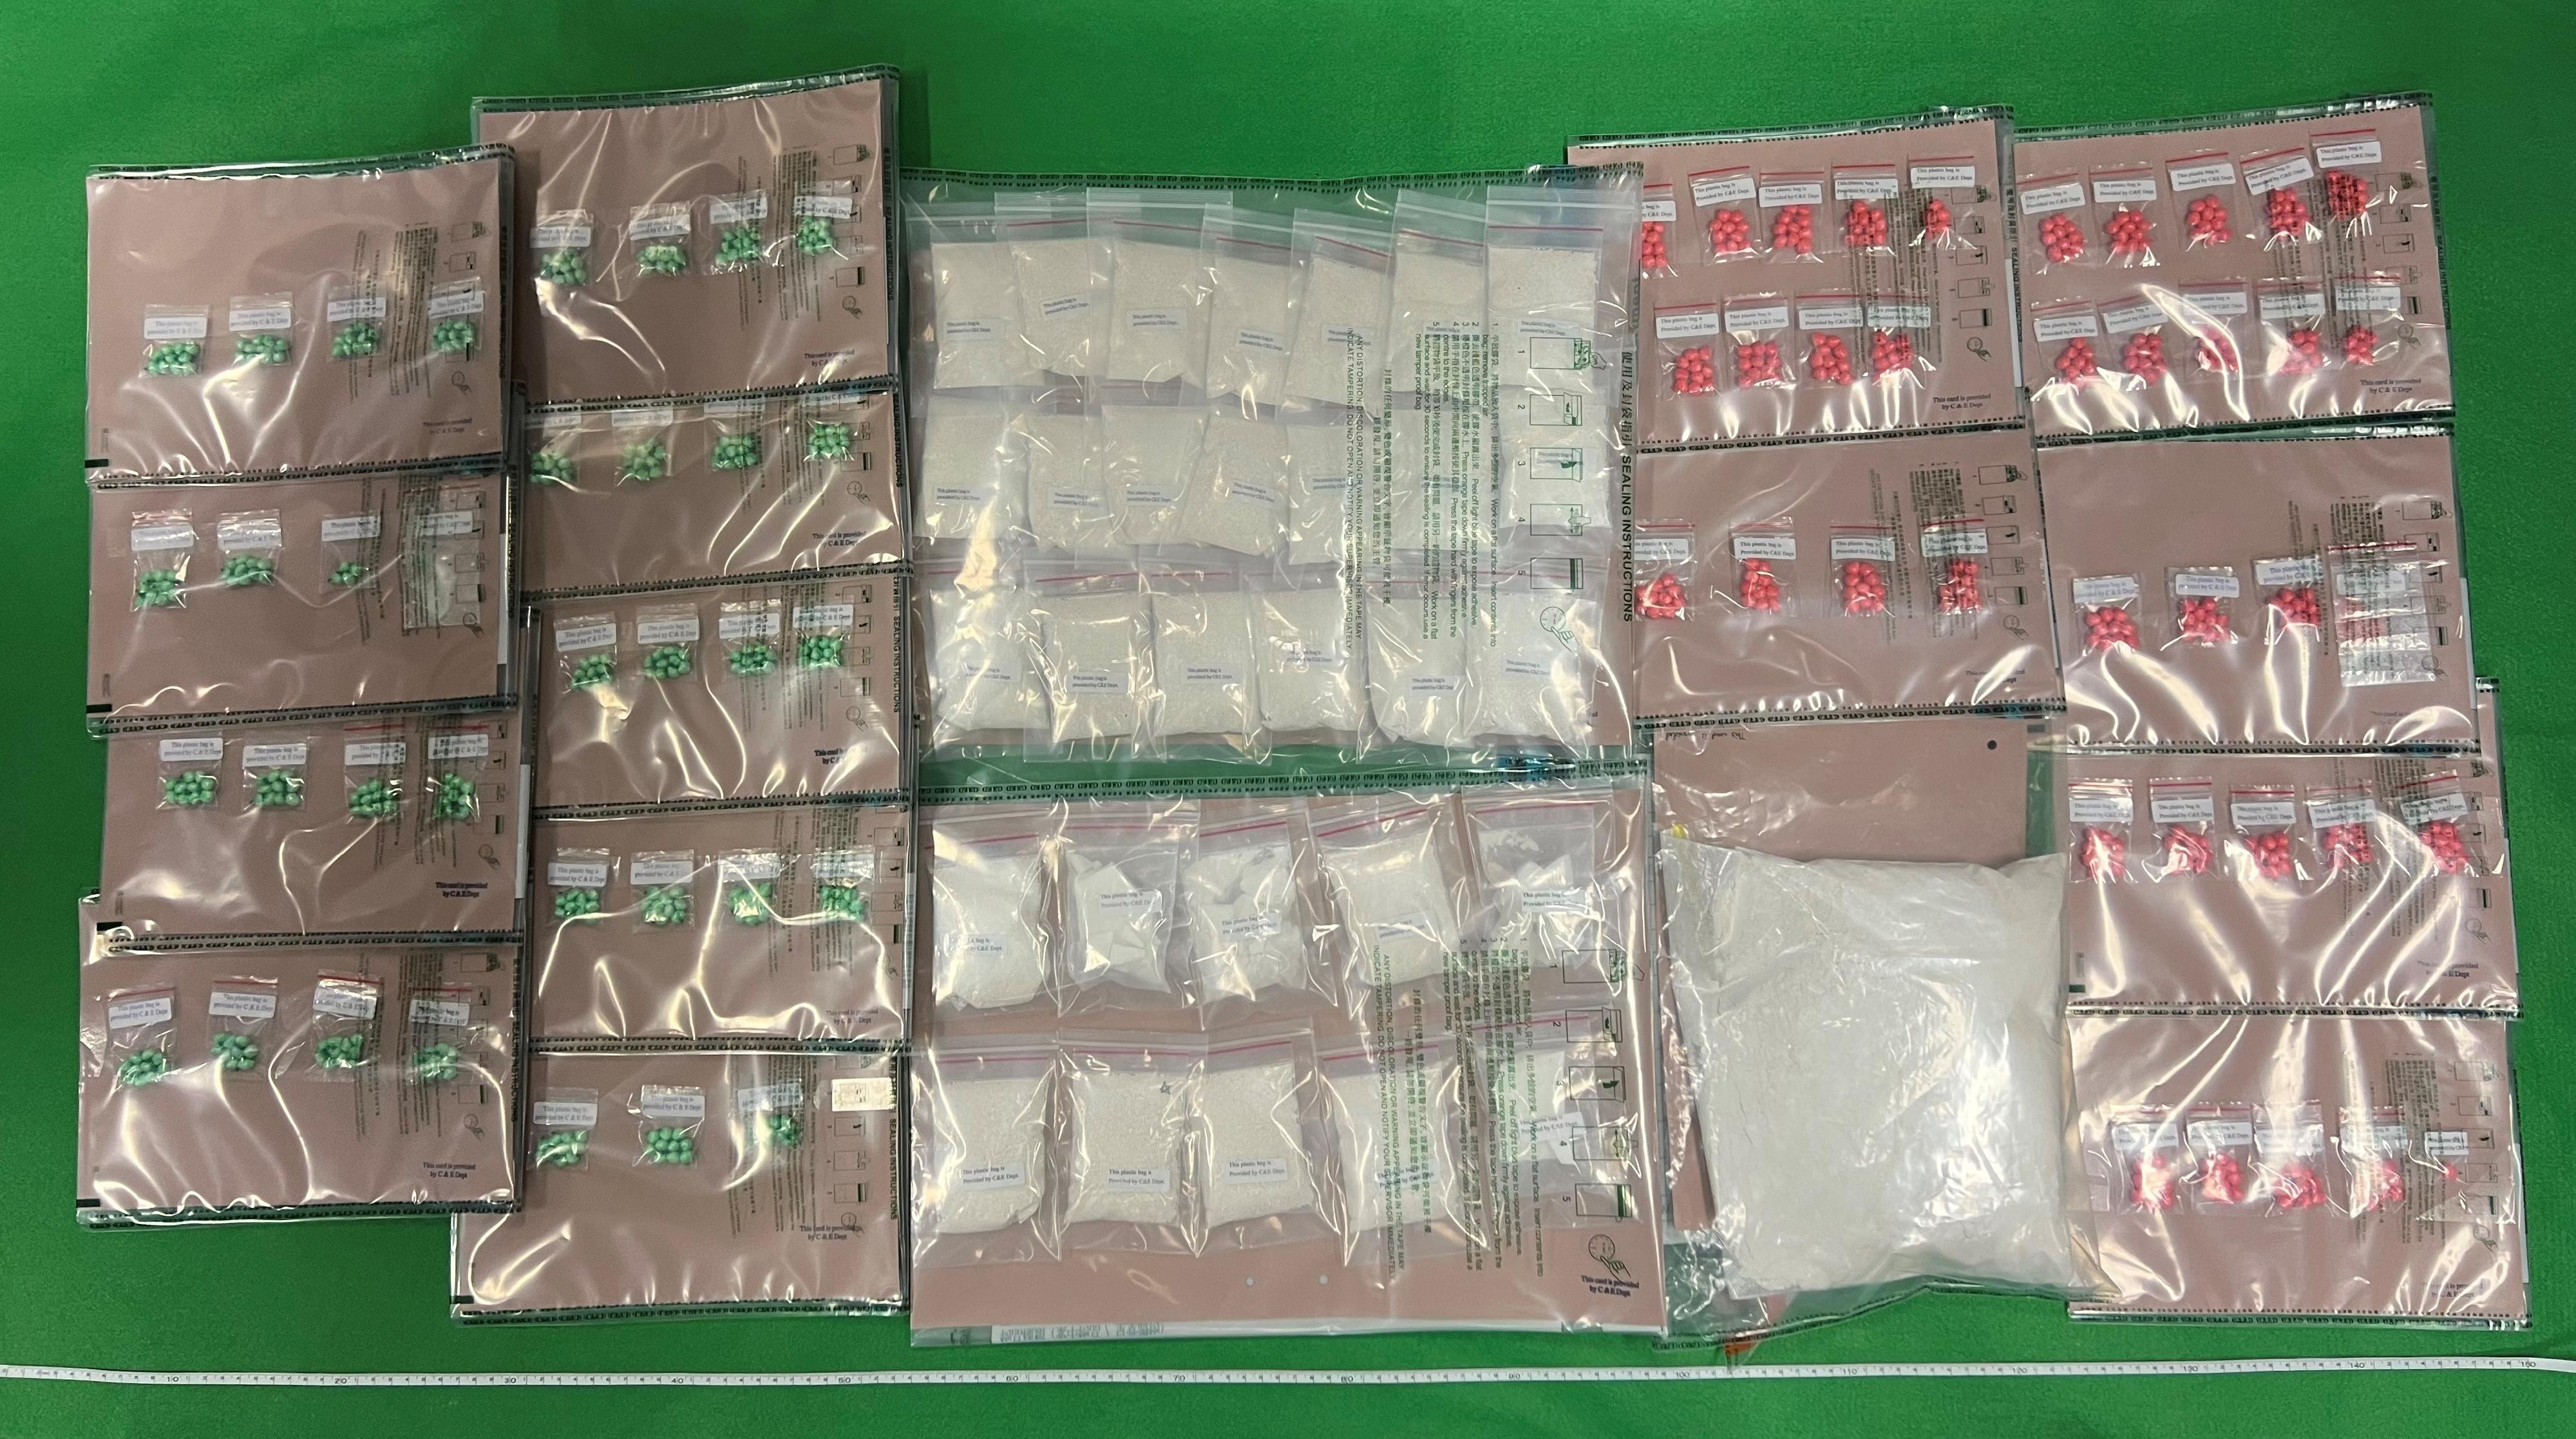 Hong Kong Customs today (October 5) seized about 2.07 kilograms of suspected heroin with an estimated market value of about $2.1 million in Tai Kok Tsui. Photo shows the suspected heorin seized.